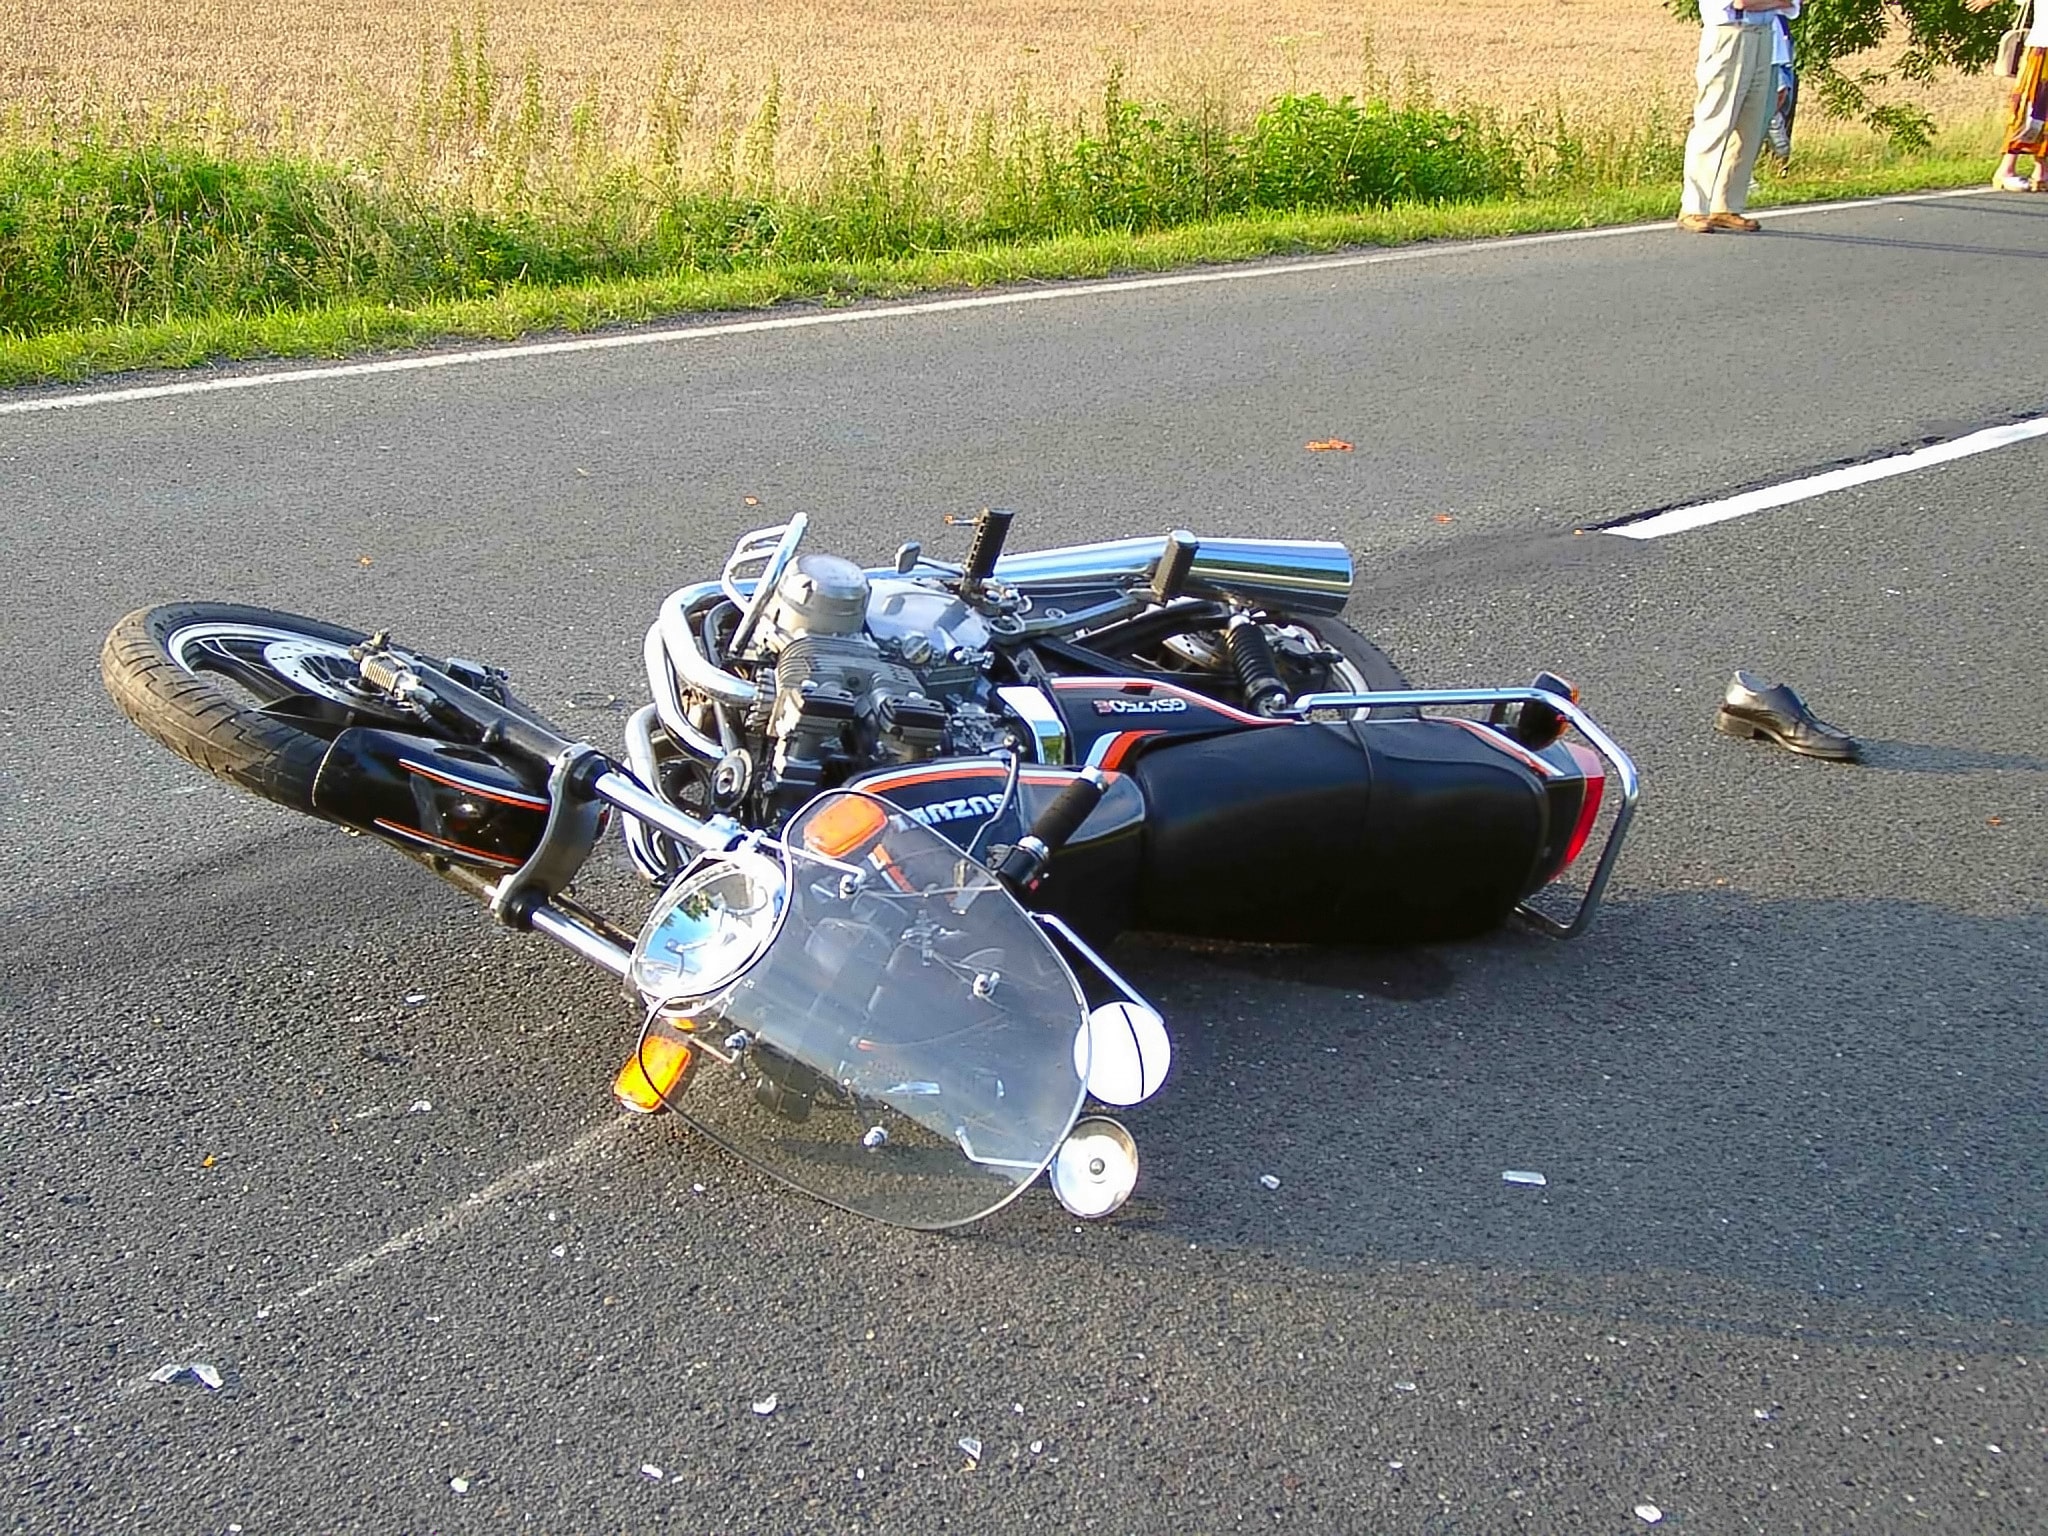  Financial Compensation During a San Antonio Motorcycle Accident